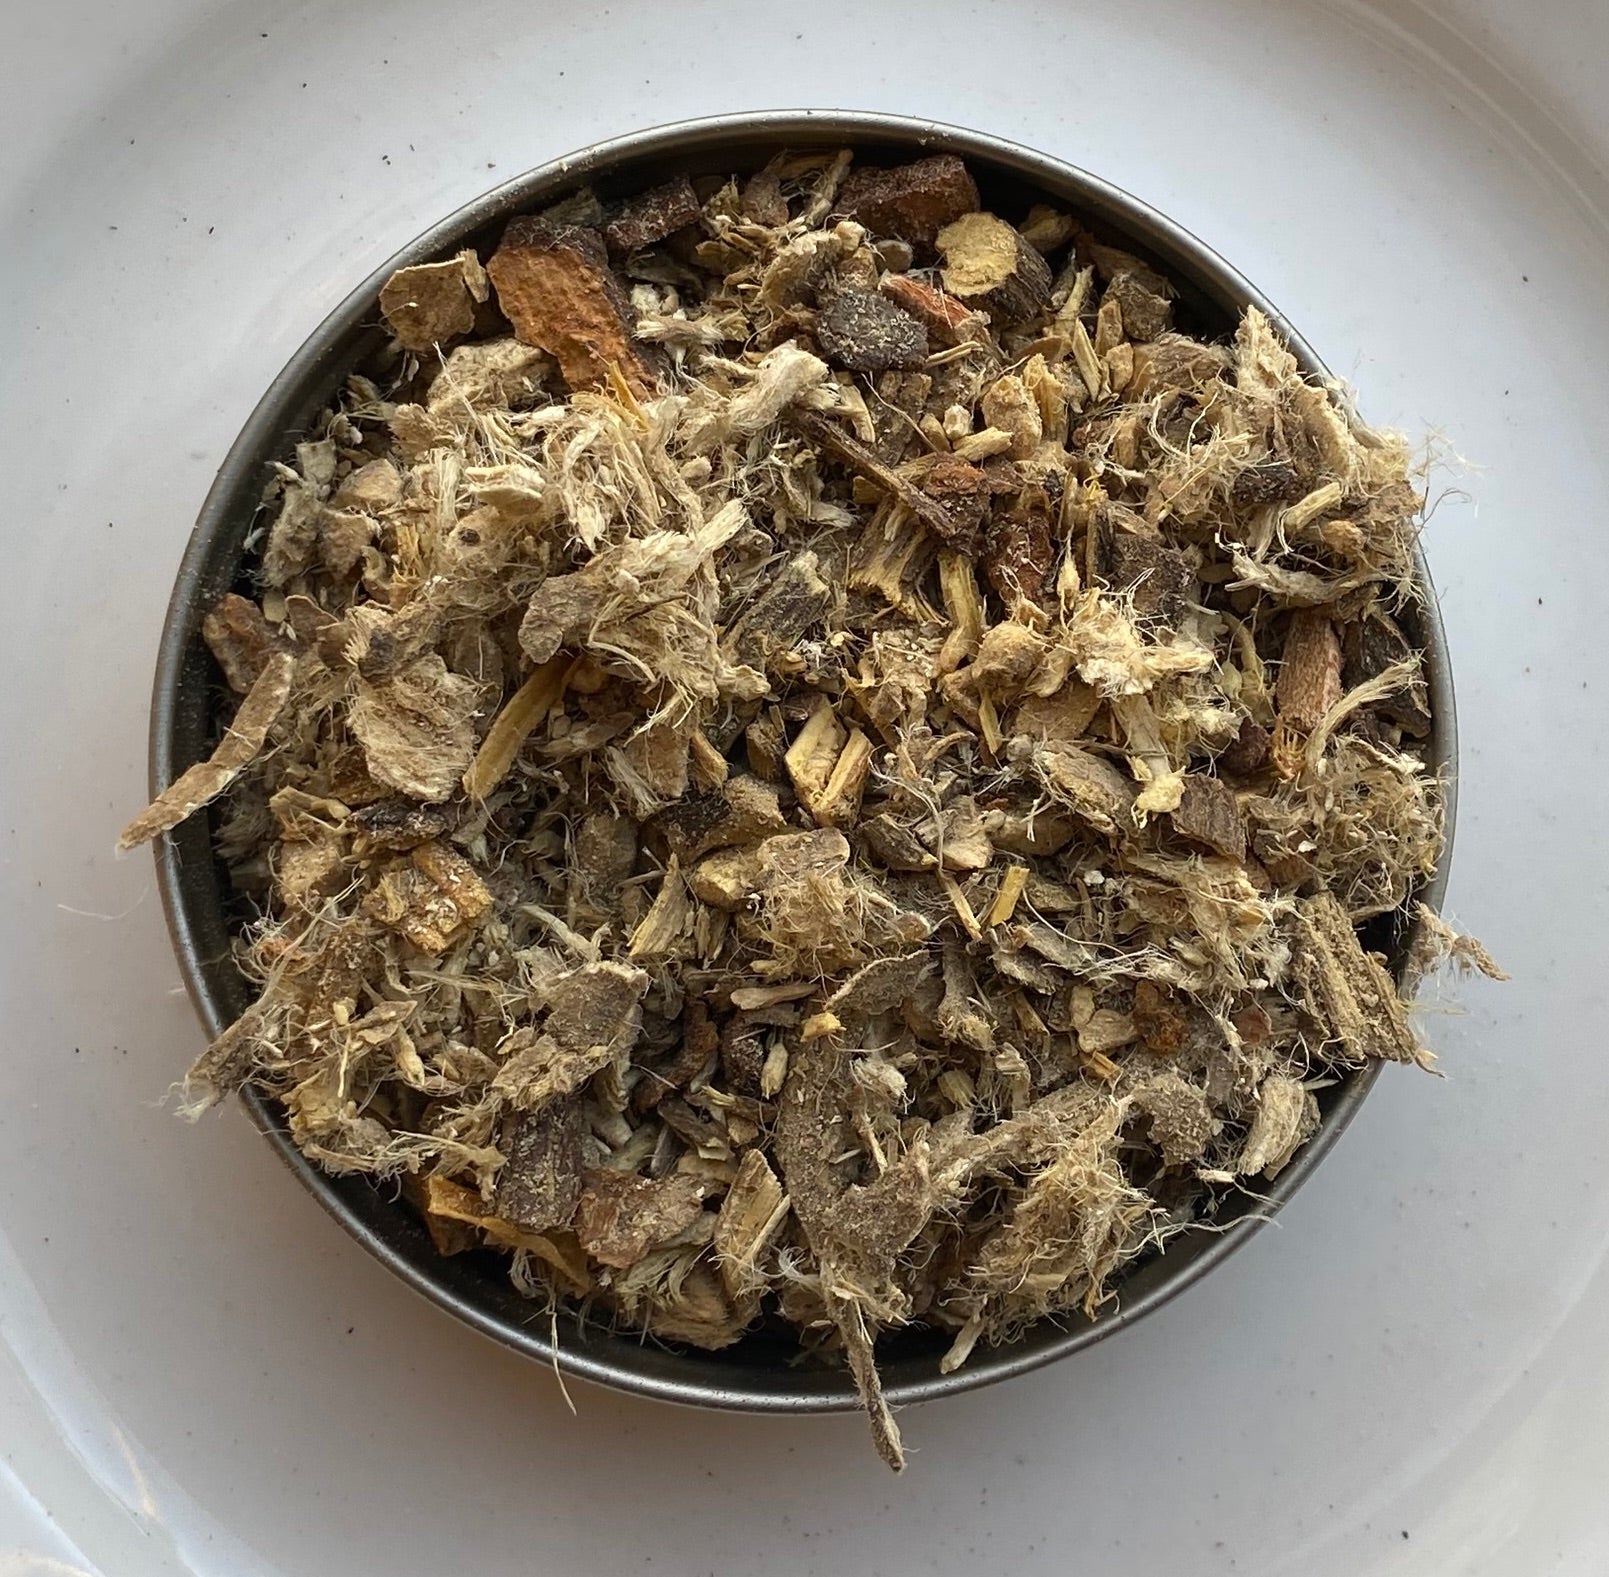 Comforting blend of Winter Remedy tea with hints of ginger and cinnamon for the chilly season.